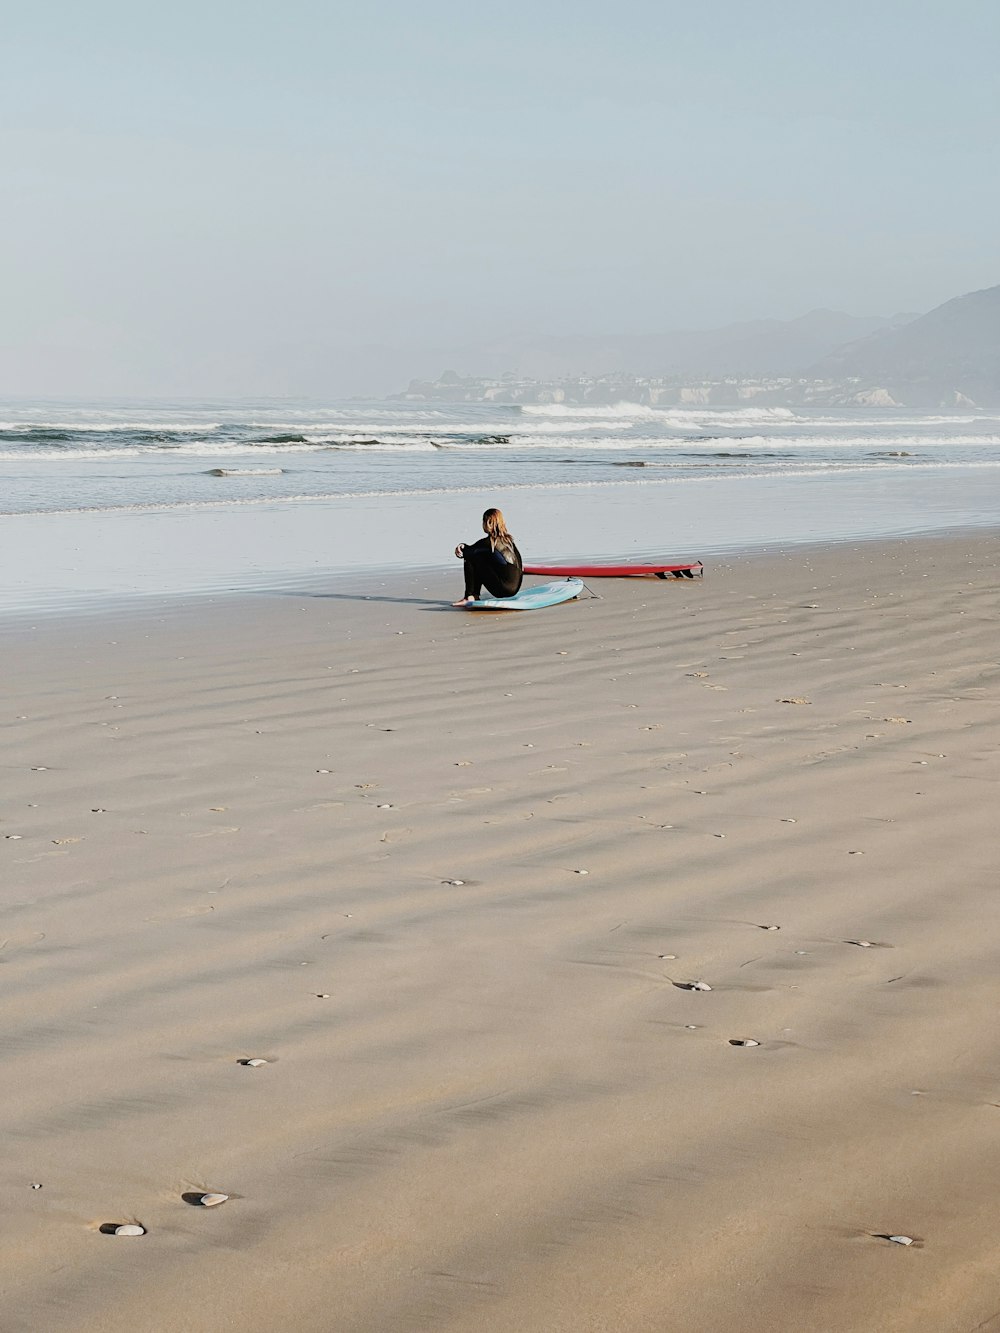 a person sitting on a surfboard on a beach